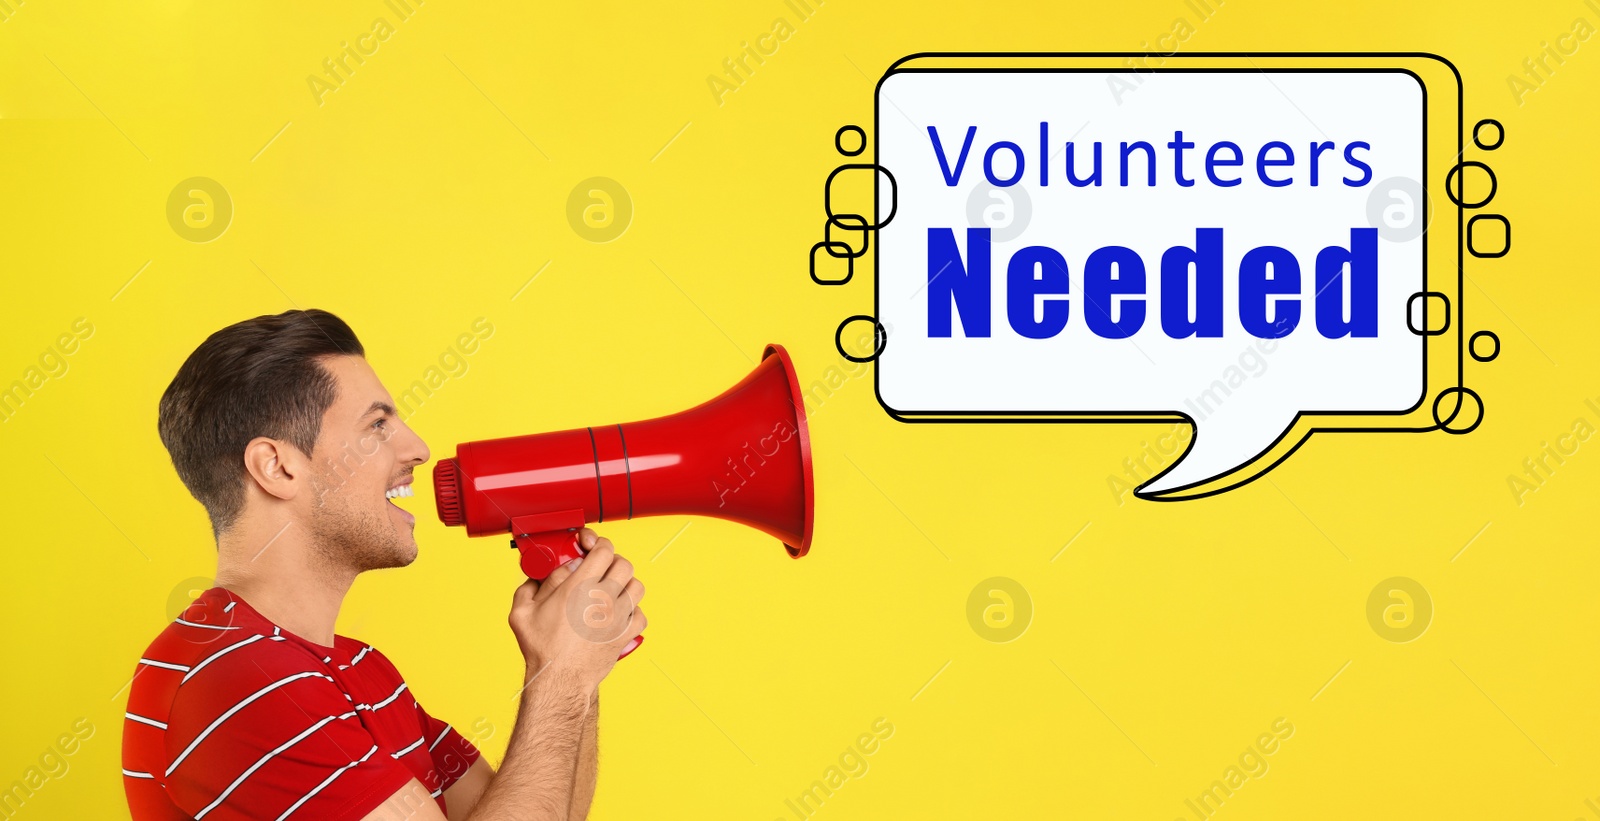 Image of Young man with megaphone and text VOLUNTEERS NEEDED on yellow background